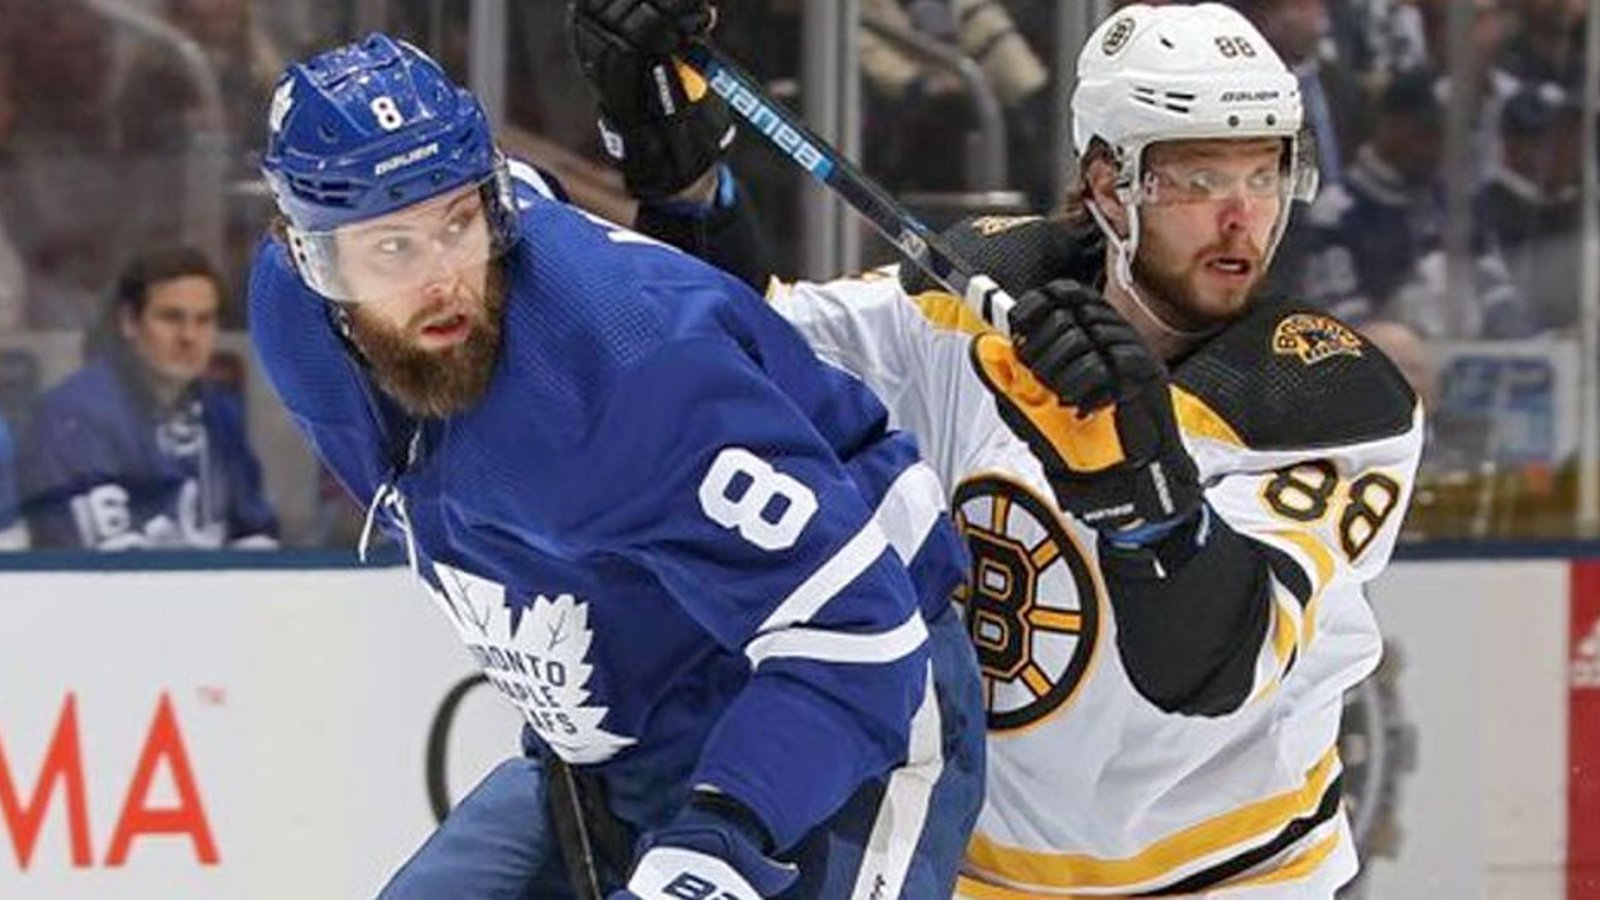 Muzzin challenges his Leafs teammates ahead of big game against Bruins